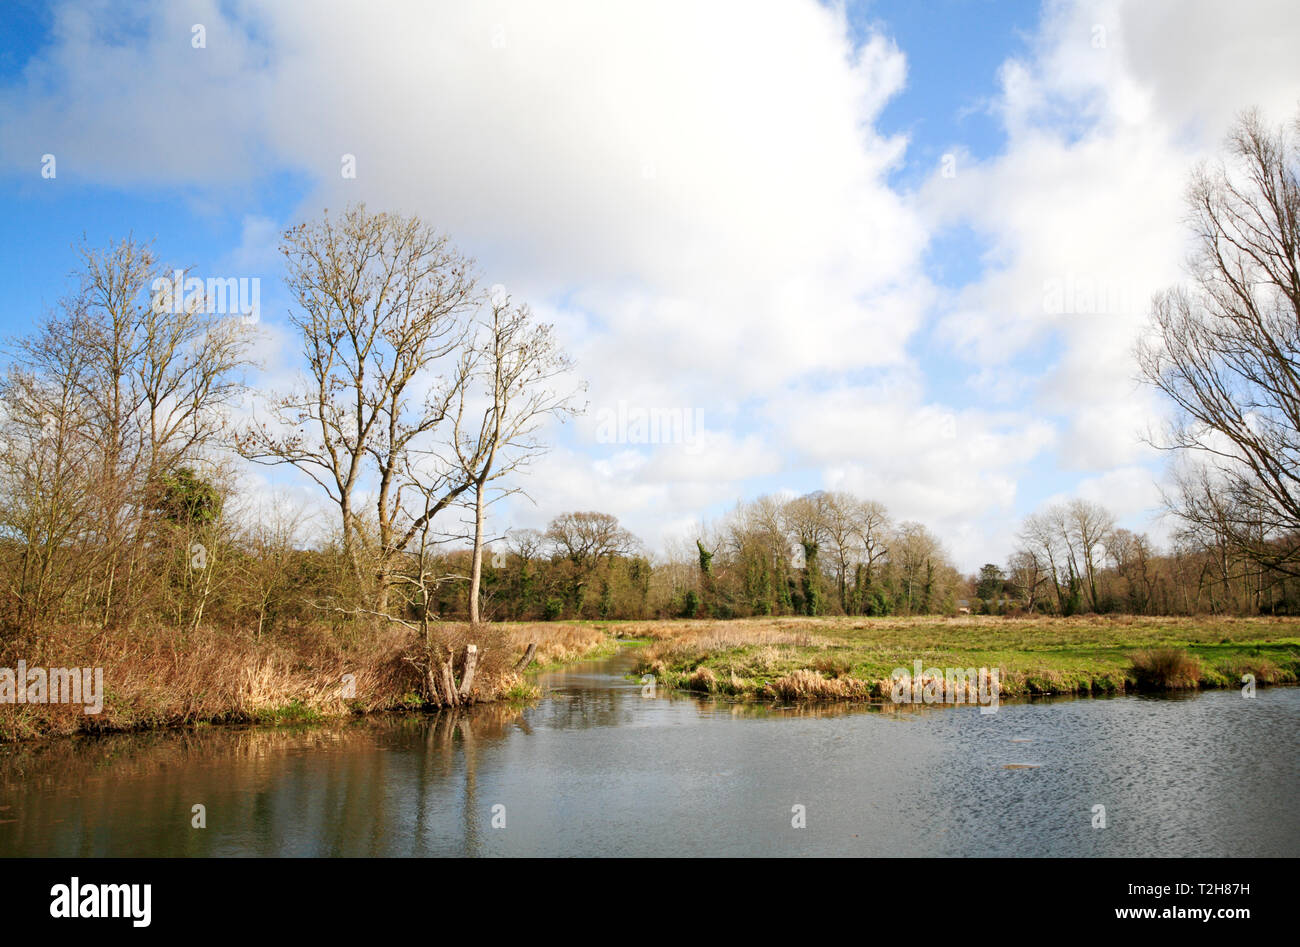 A view of marshes with canal bypassing Horstead Mill from the River Bure at Coltishall, Norfolk, England, United Kingdom, Europe. Stock Photo